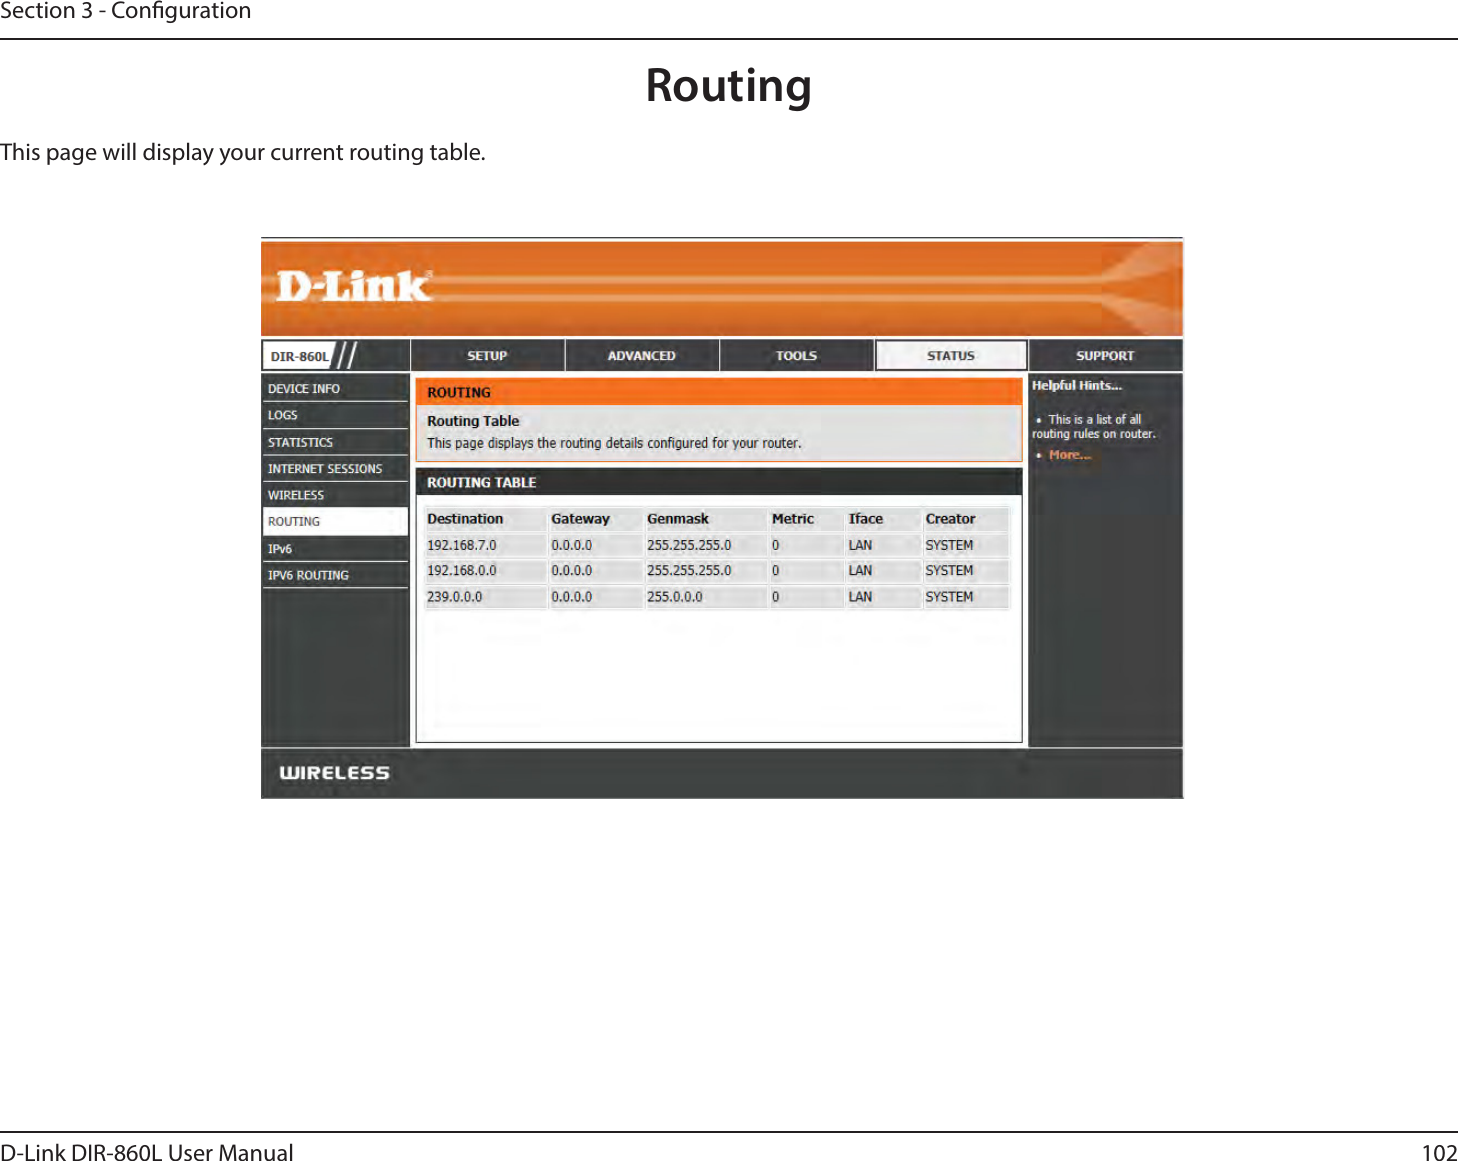 102D-Link DIR-860L User ManualSection 3 - CongurationRoutingThis page will display your current routing table.